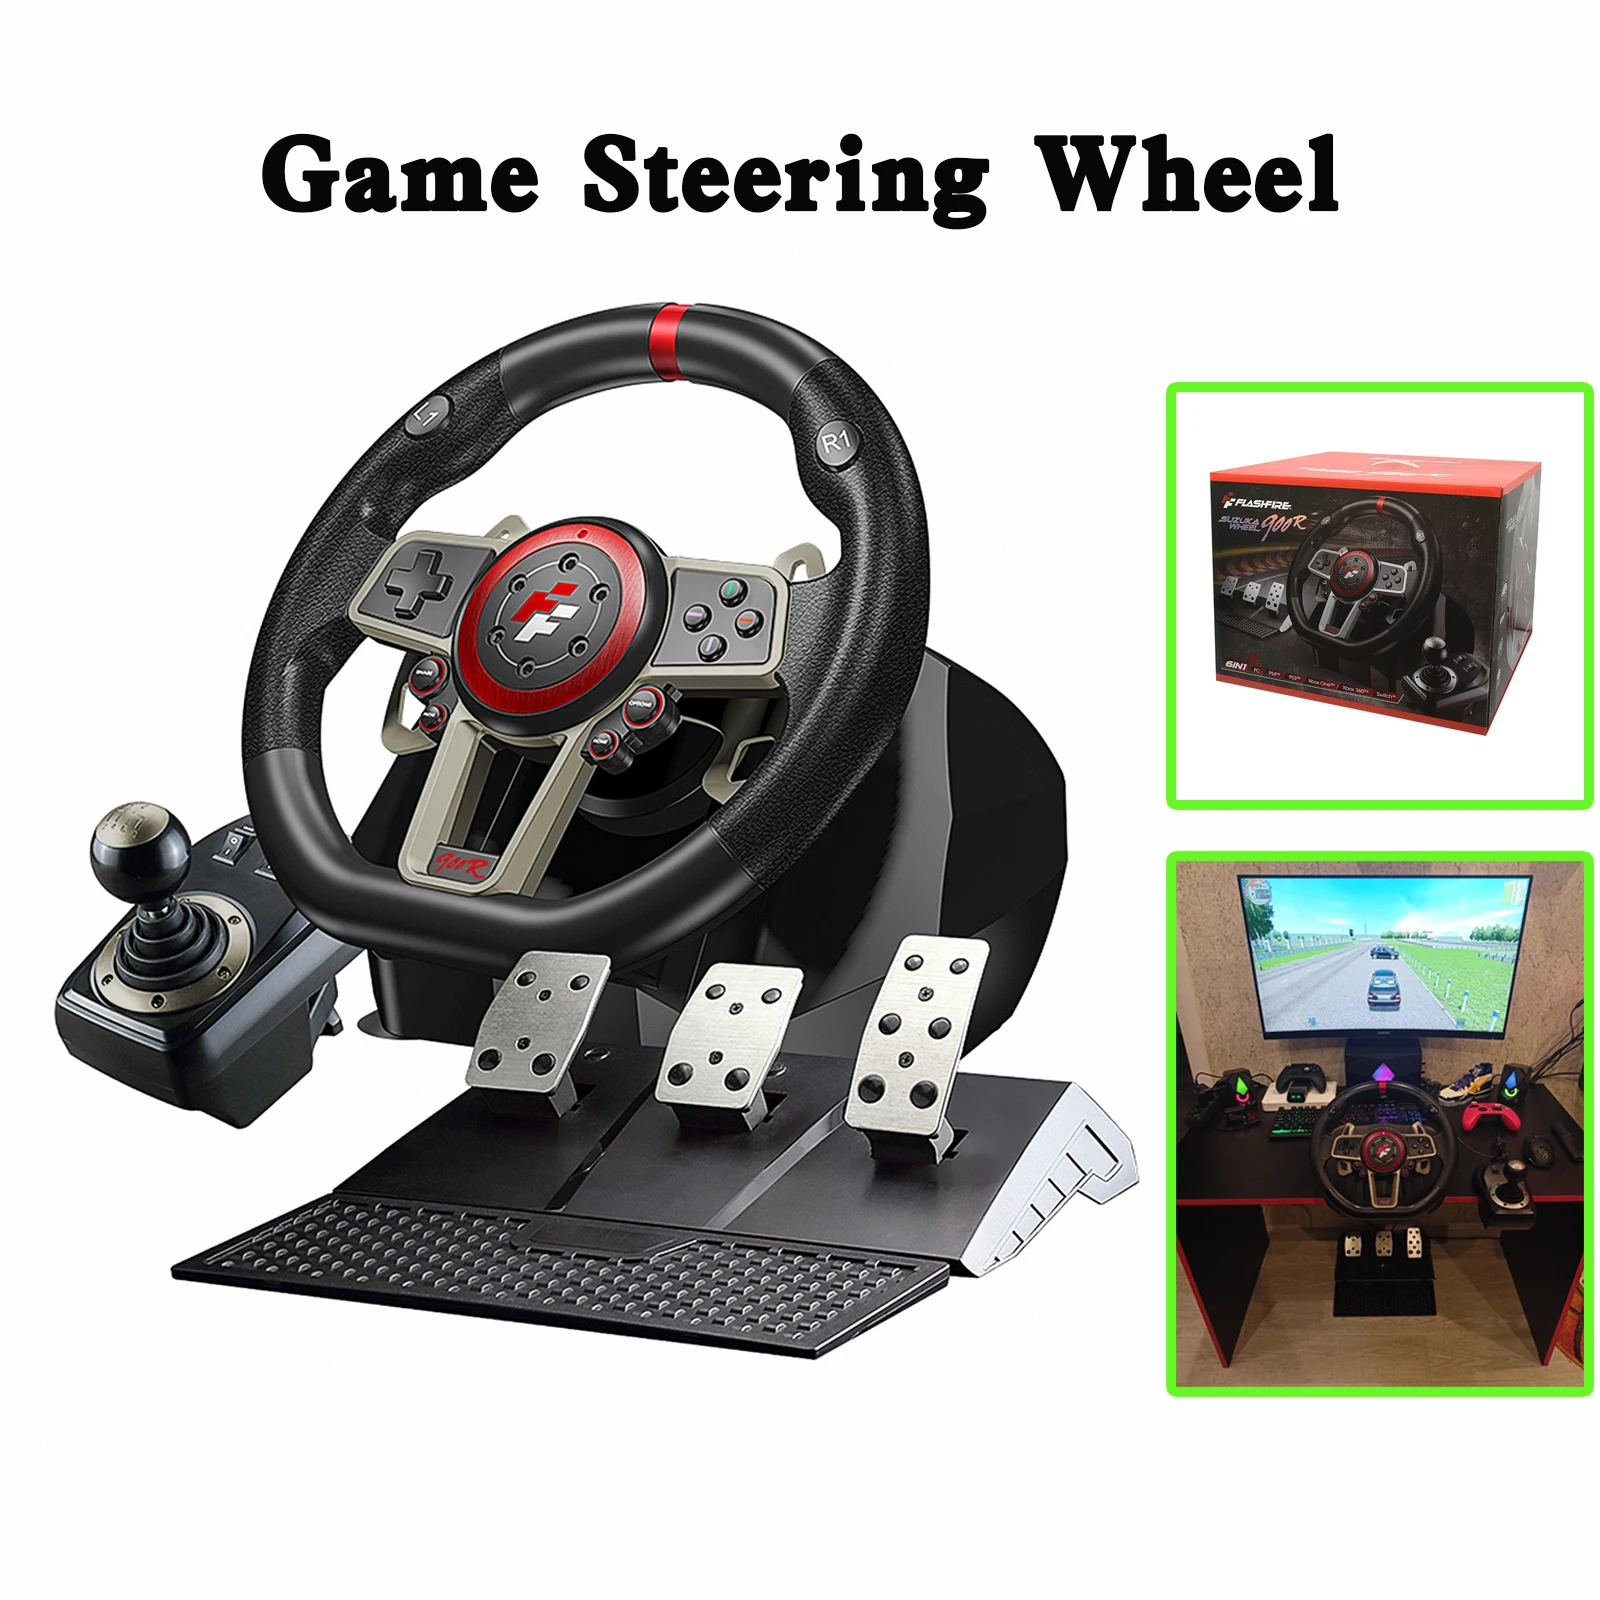 

900 Drive Racing Steering Wheel for Pc/ps3/ps4/Xbox One/Xbox360/Nintendo Switch Accessories Game Vibration Joysticks Volante